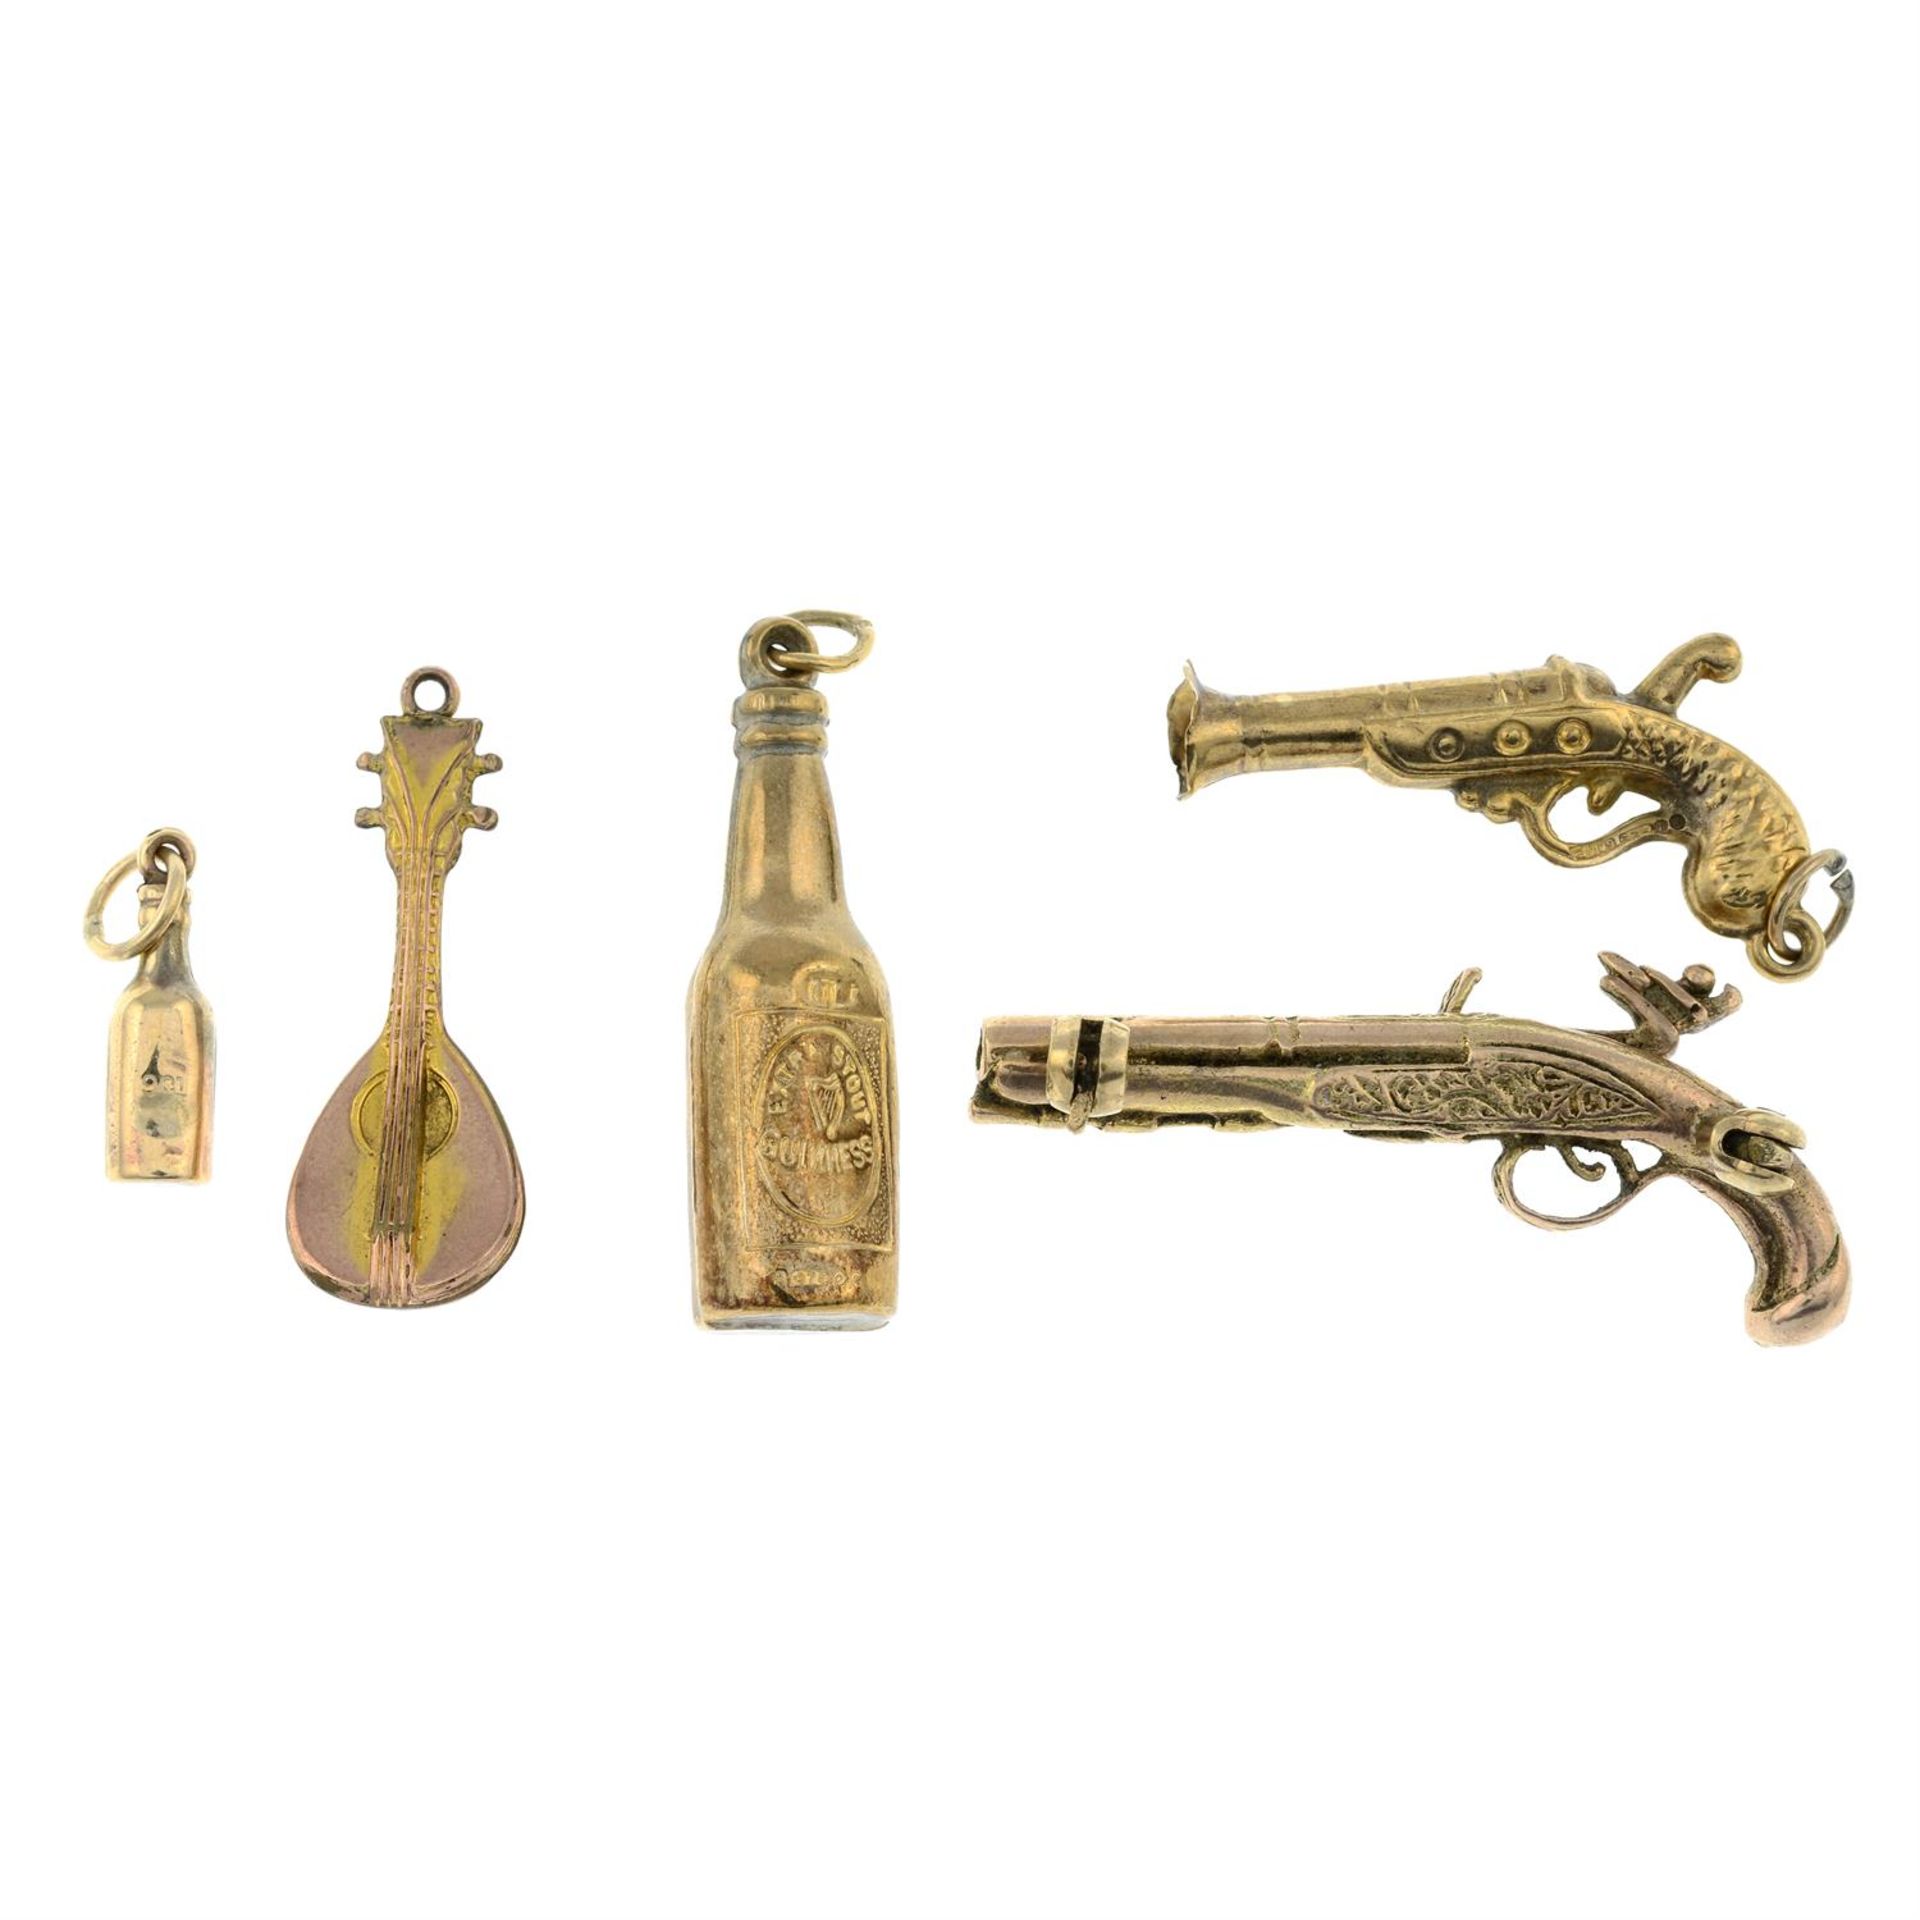 Three 9ct gold charms, together with a further charm and a 9ct gold pistol brooch.